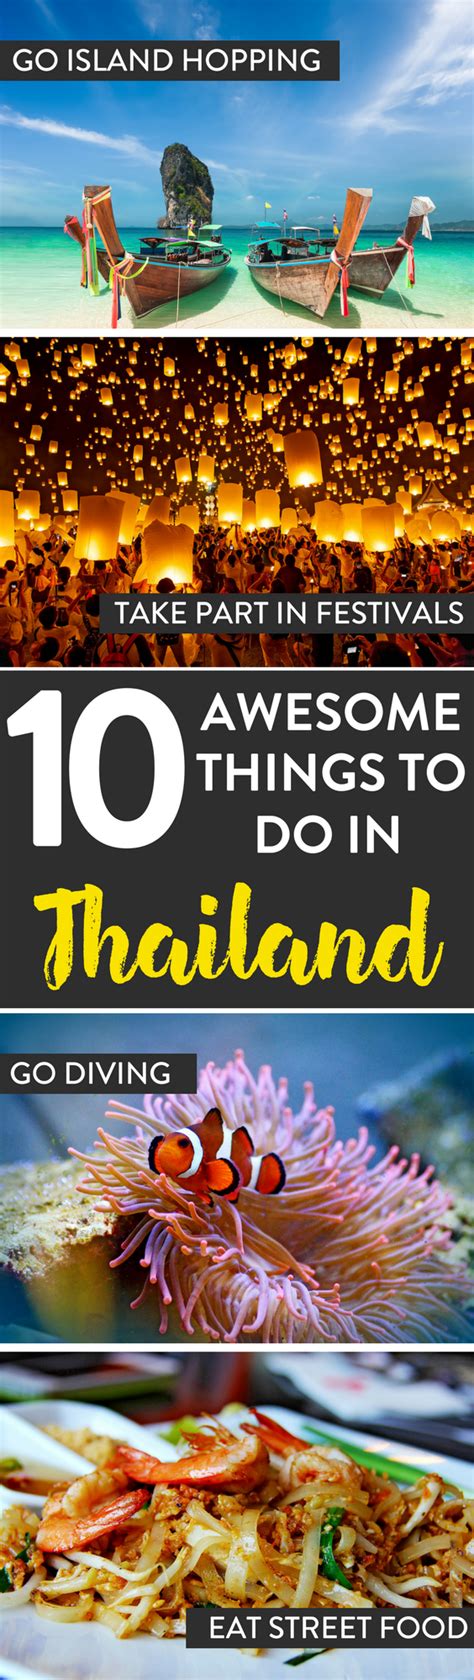 Thailand Travel Looking For Awesome Things To Do While In Thailand